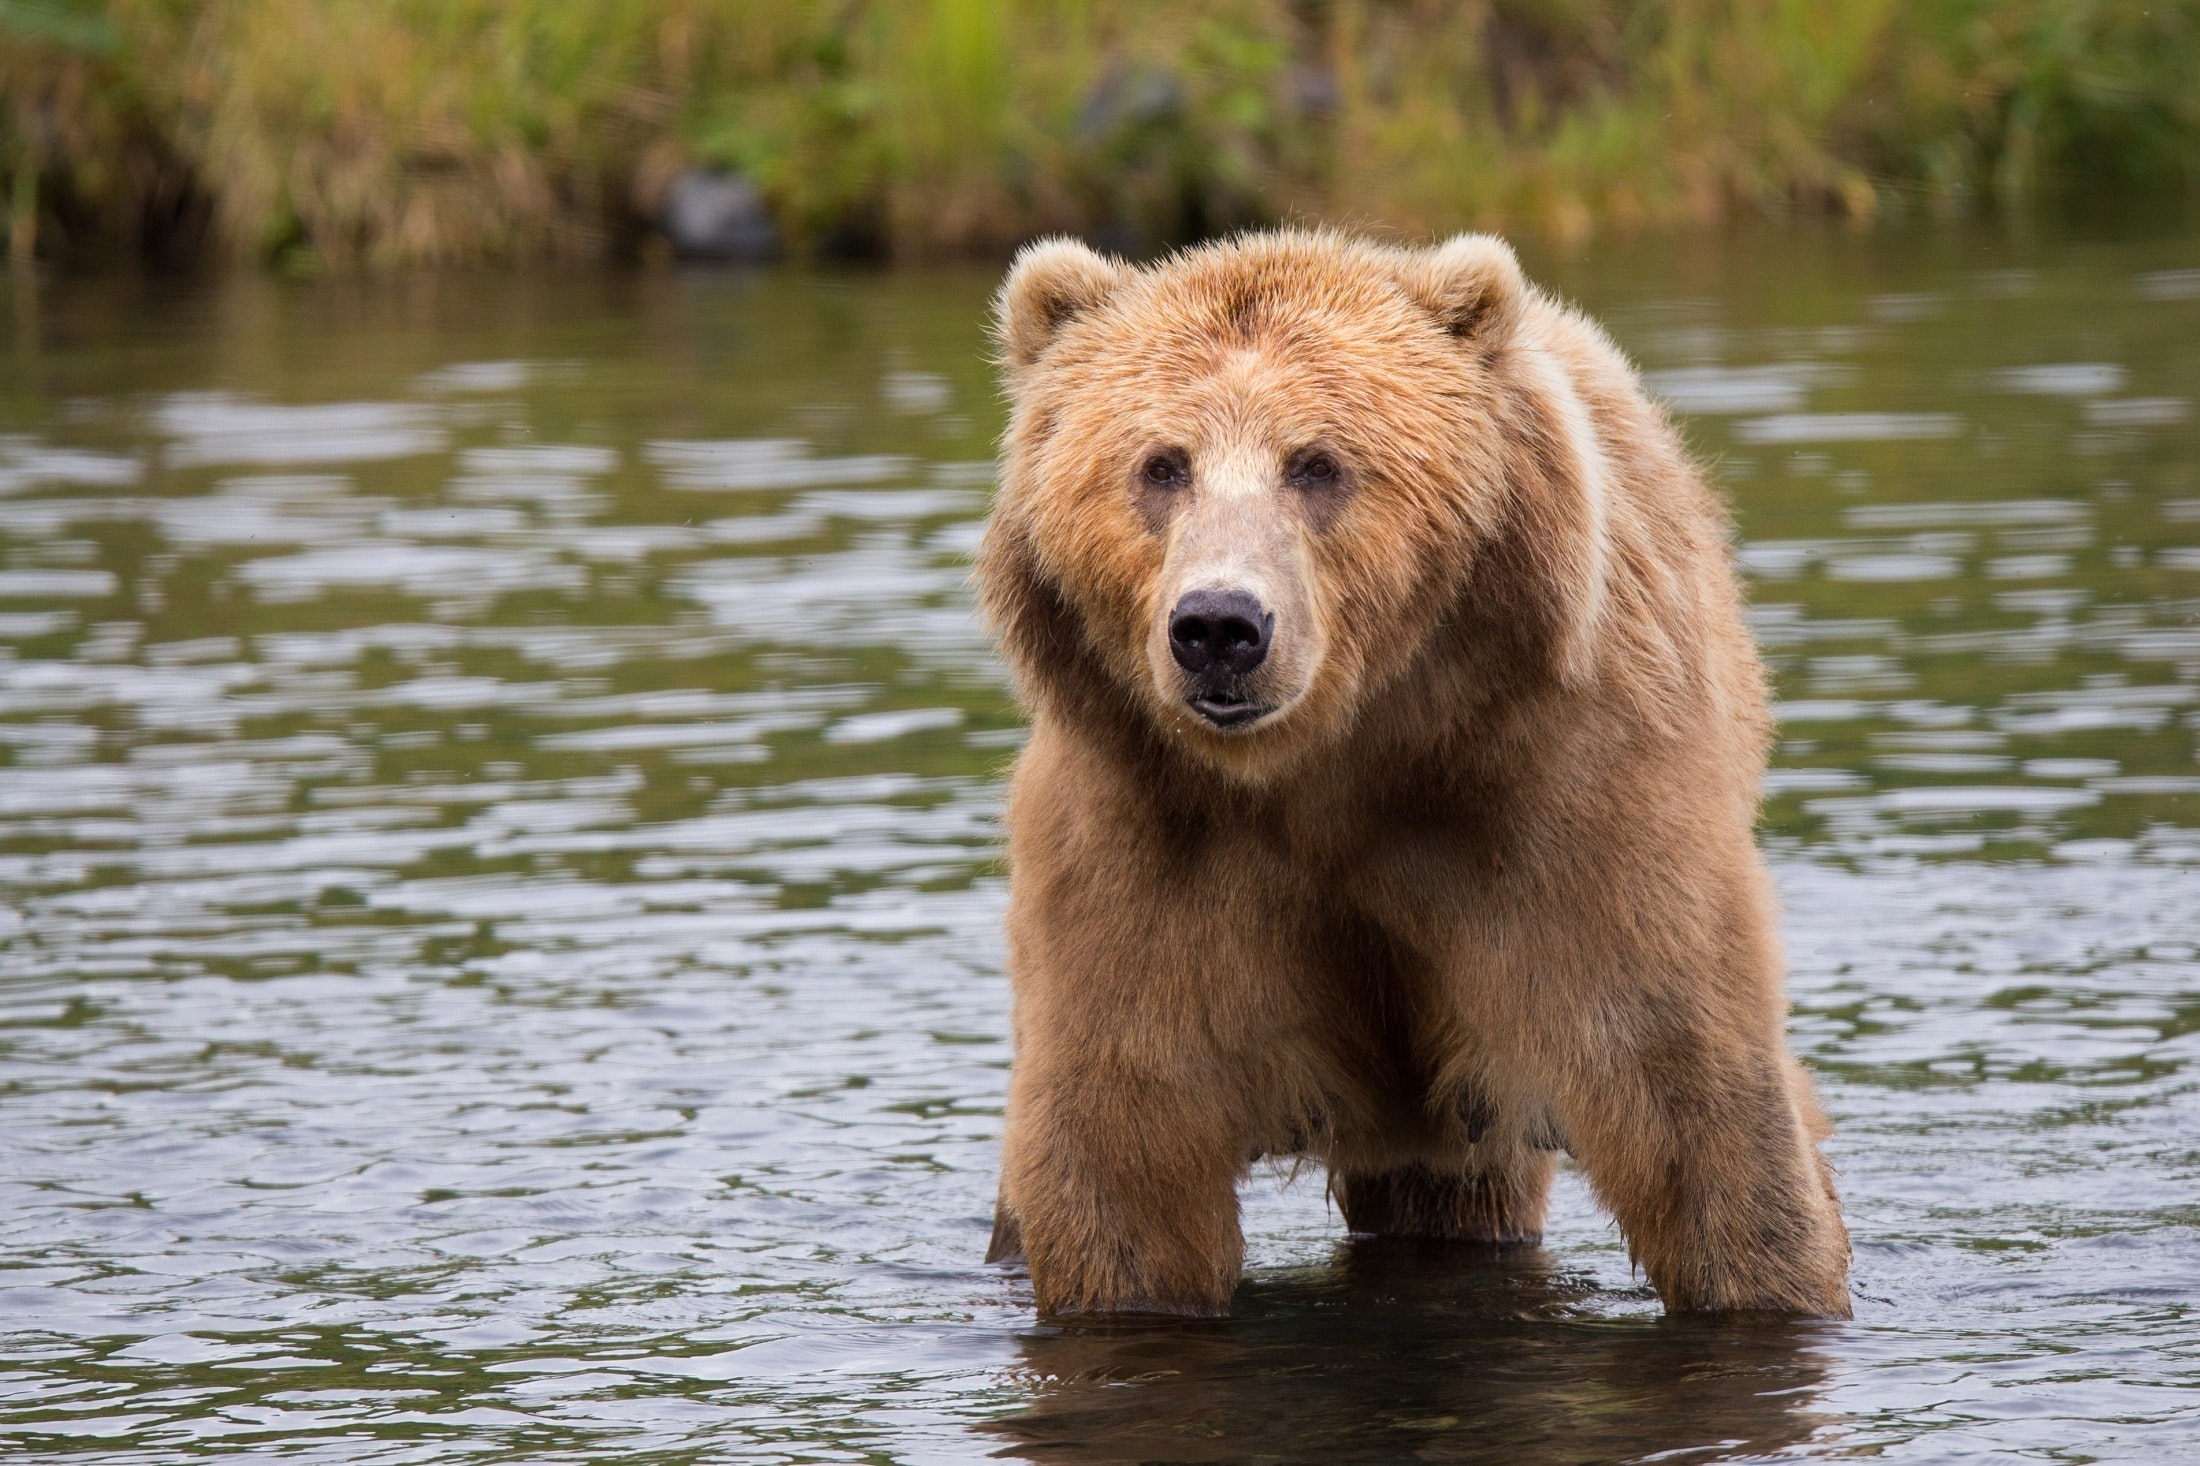 Brown bear in body of water during daytime photo